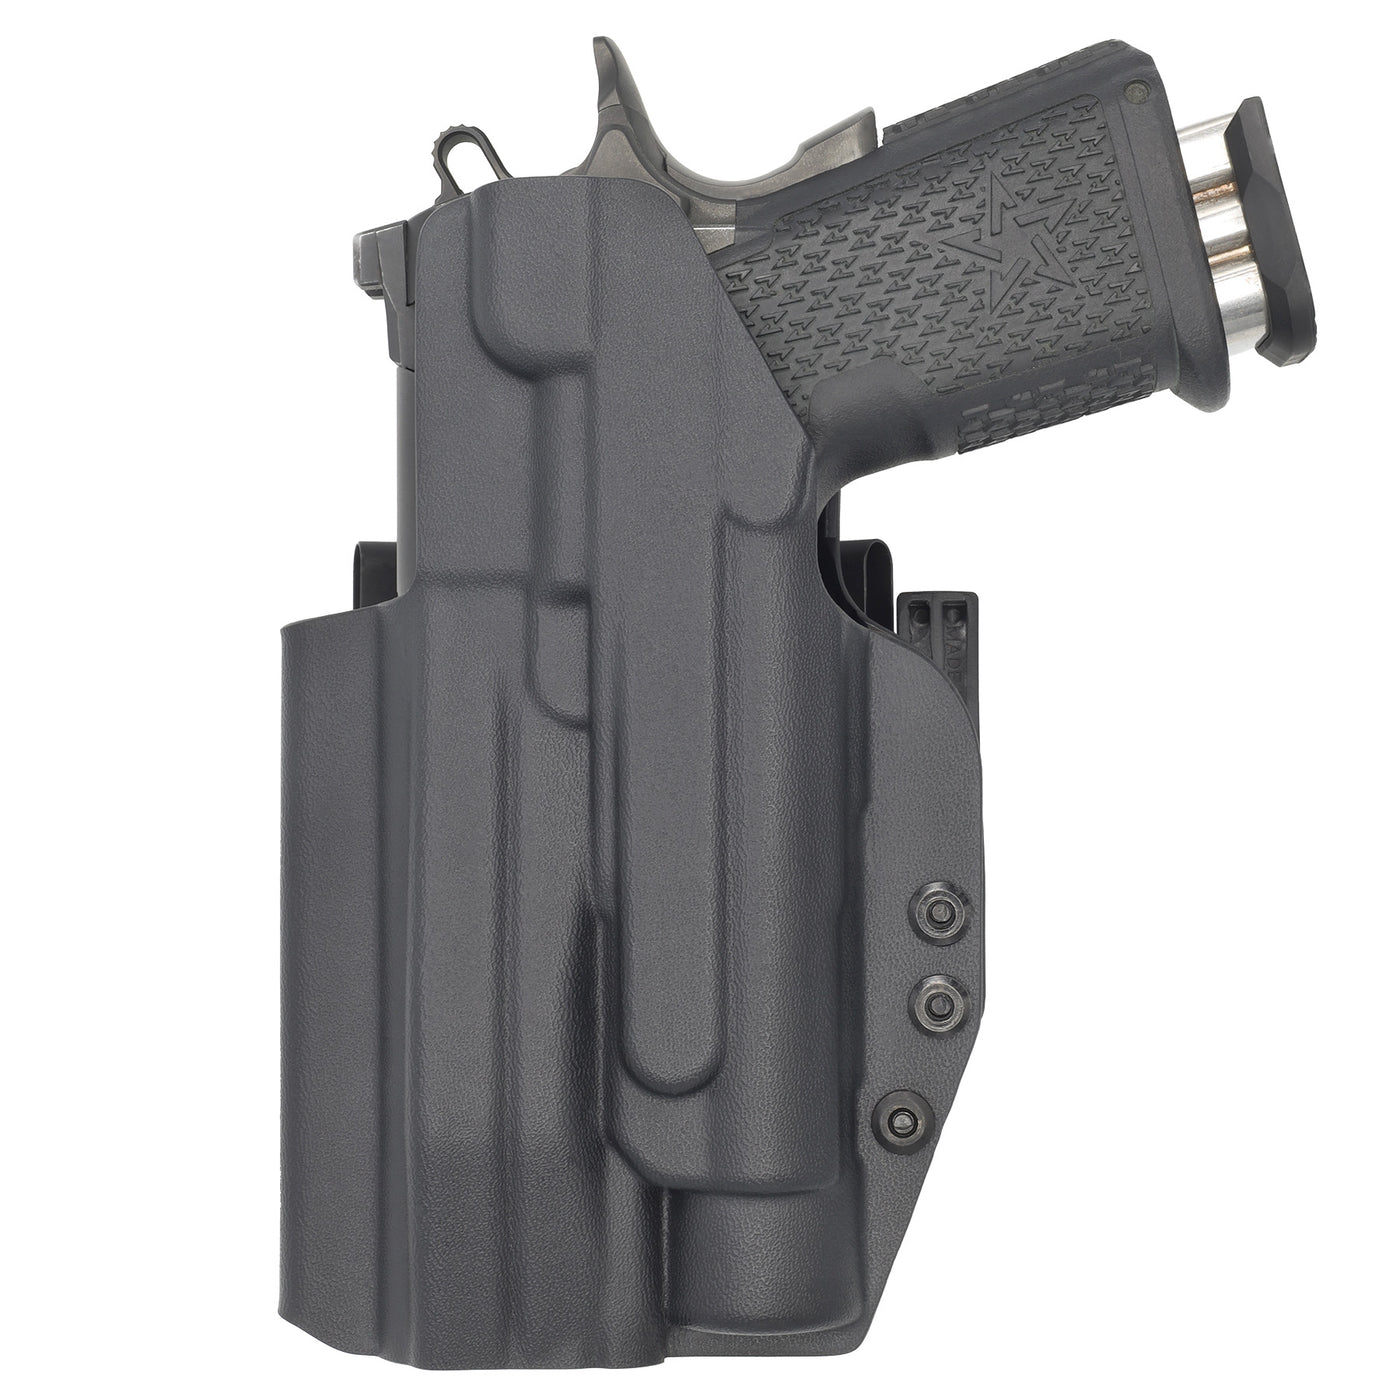 C&G Holsters custom ALPHA UPGRADE IWB Tactical staccato TLR1 in holstered position back view